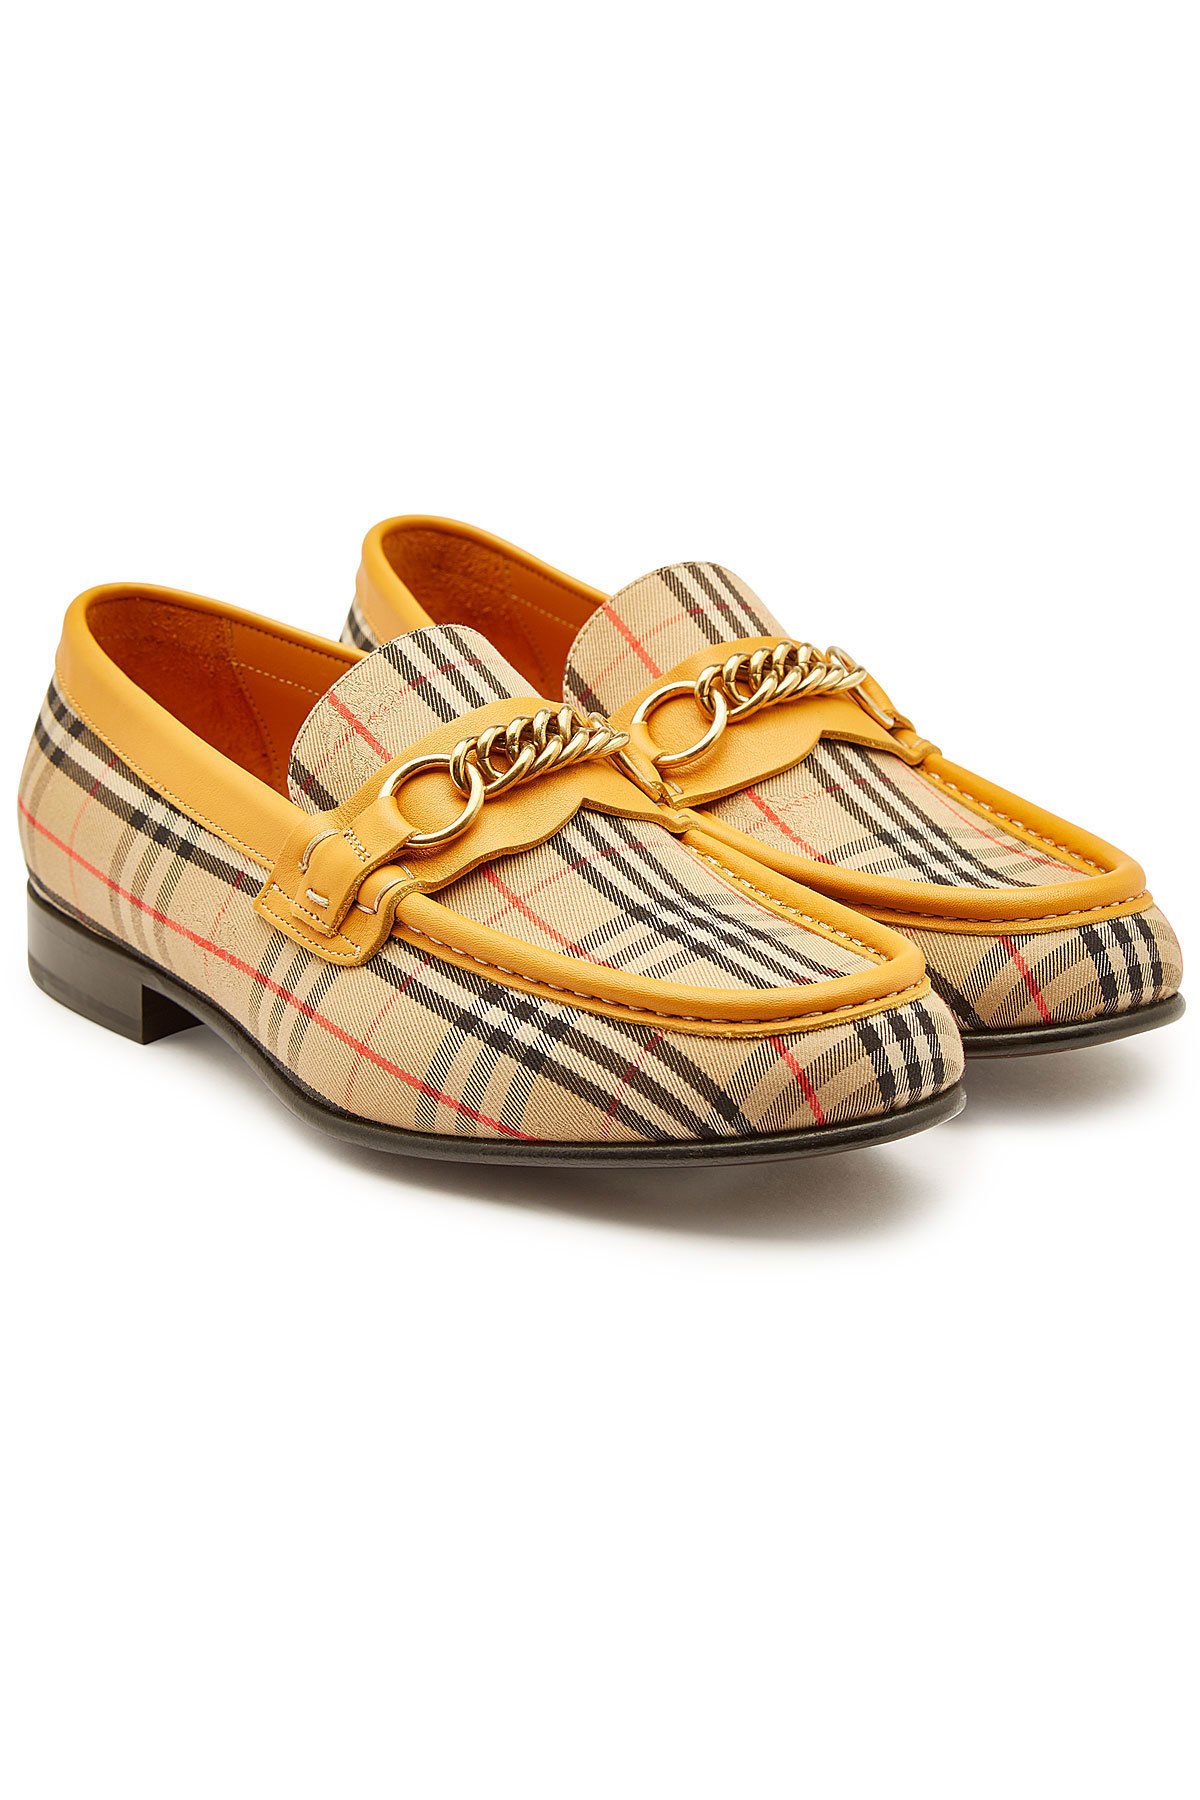 Burberry Moorley Leather Loafers In 